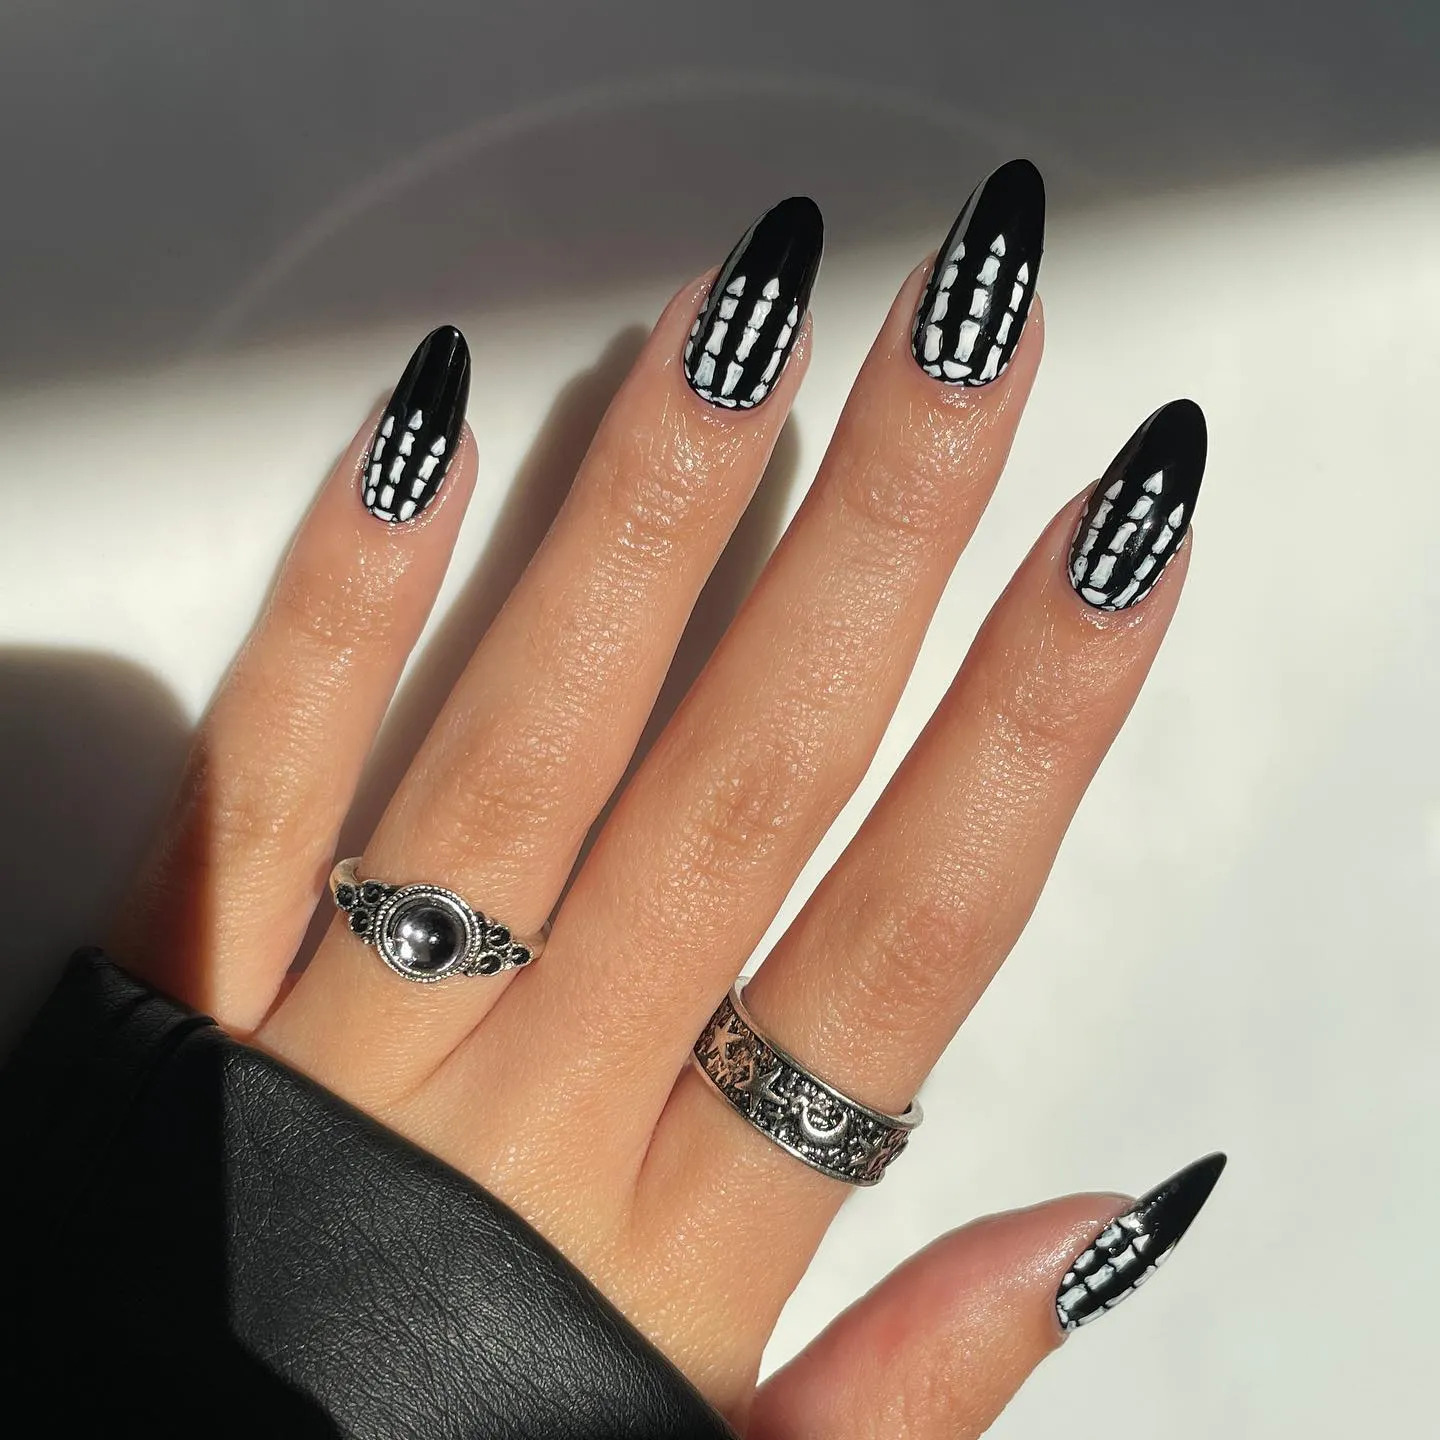 Cute Halloween Nails With Skeleton Design